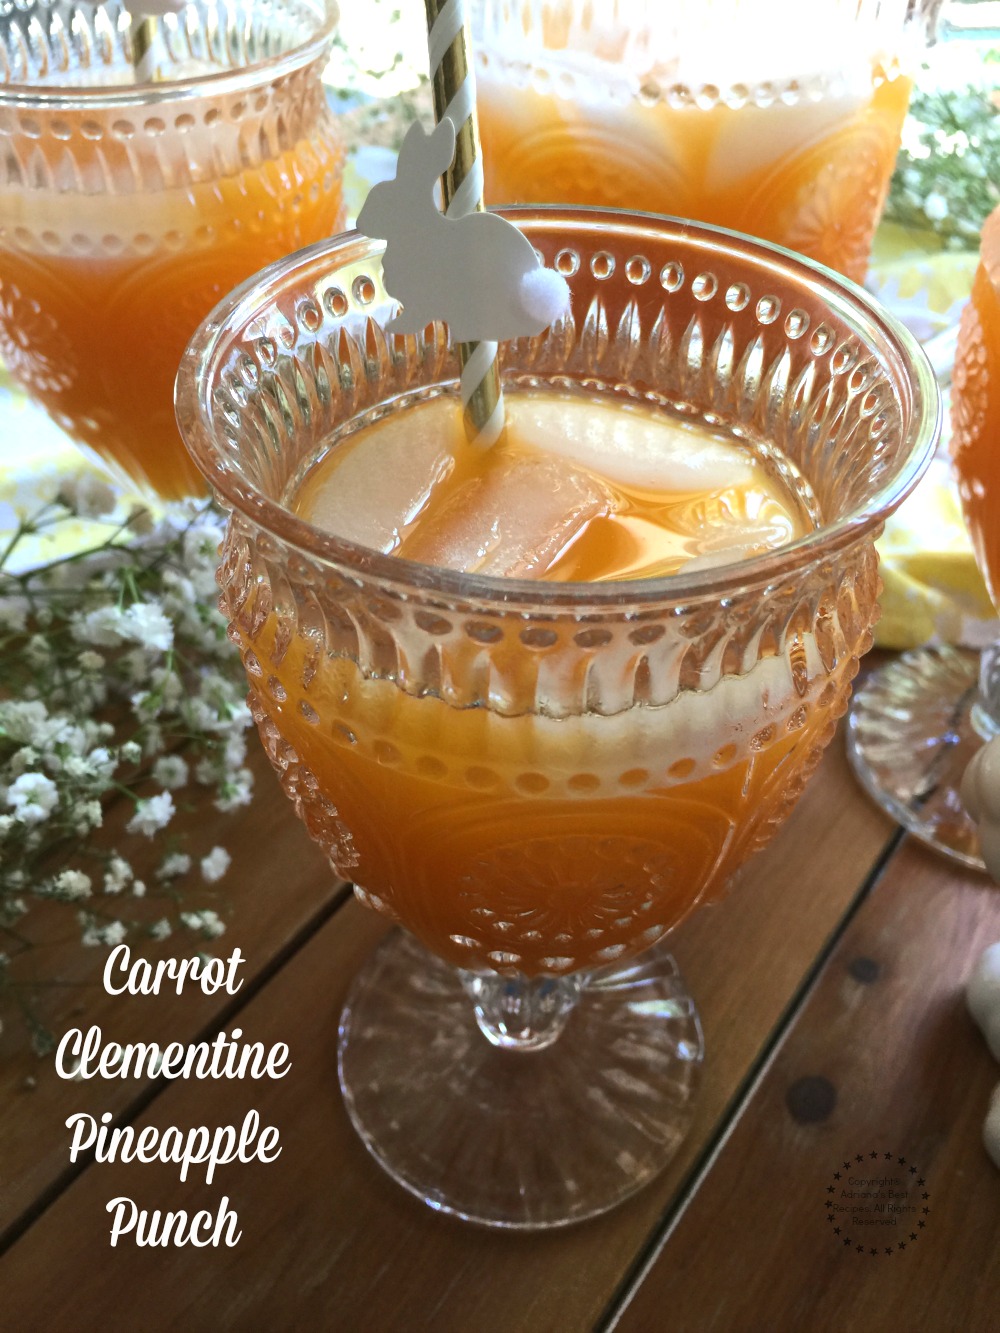 Carrot Clementine Pineapple Punch made with freshly pressed juice